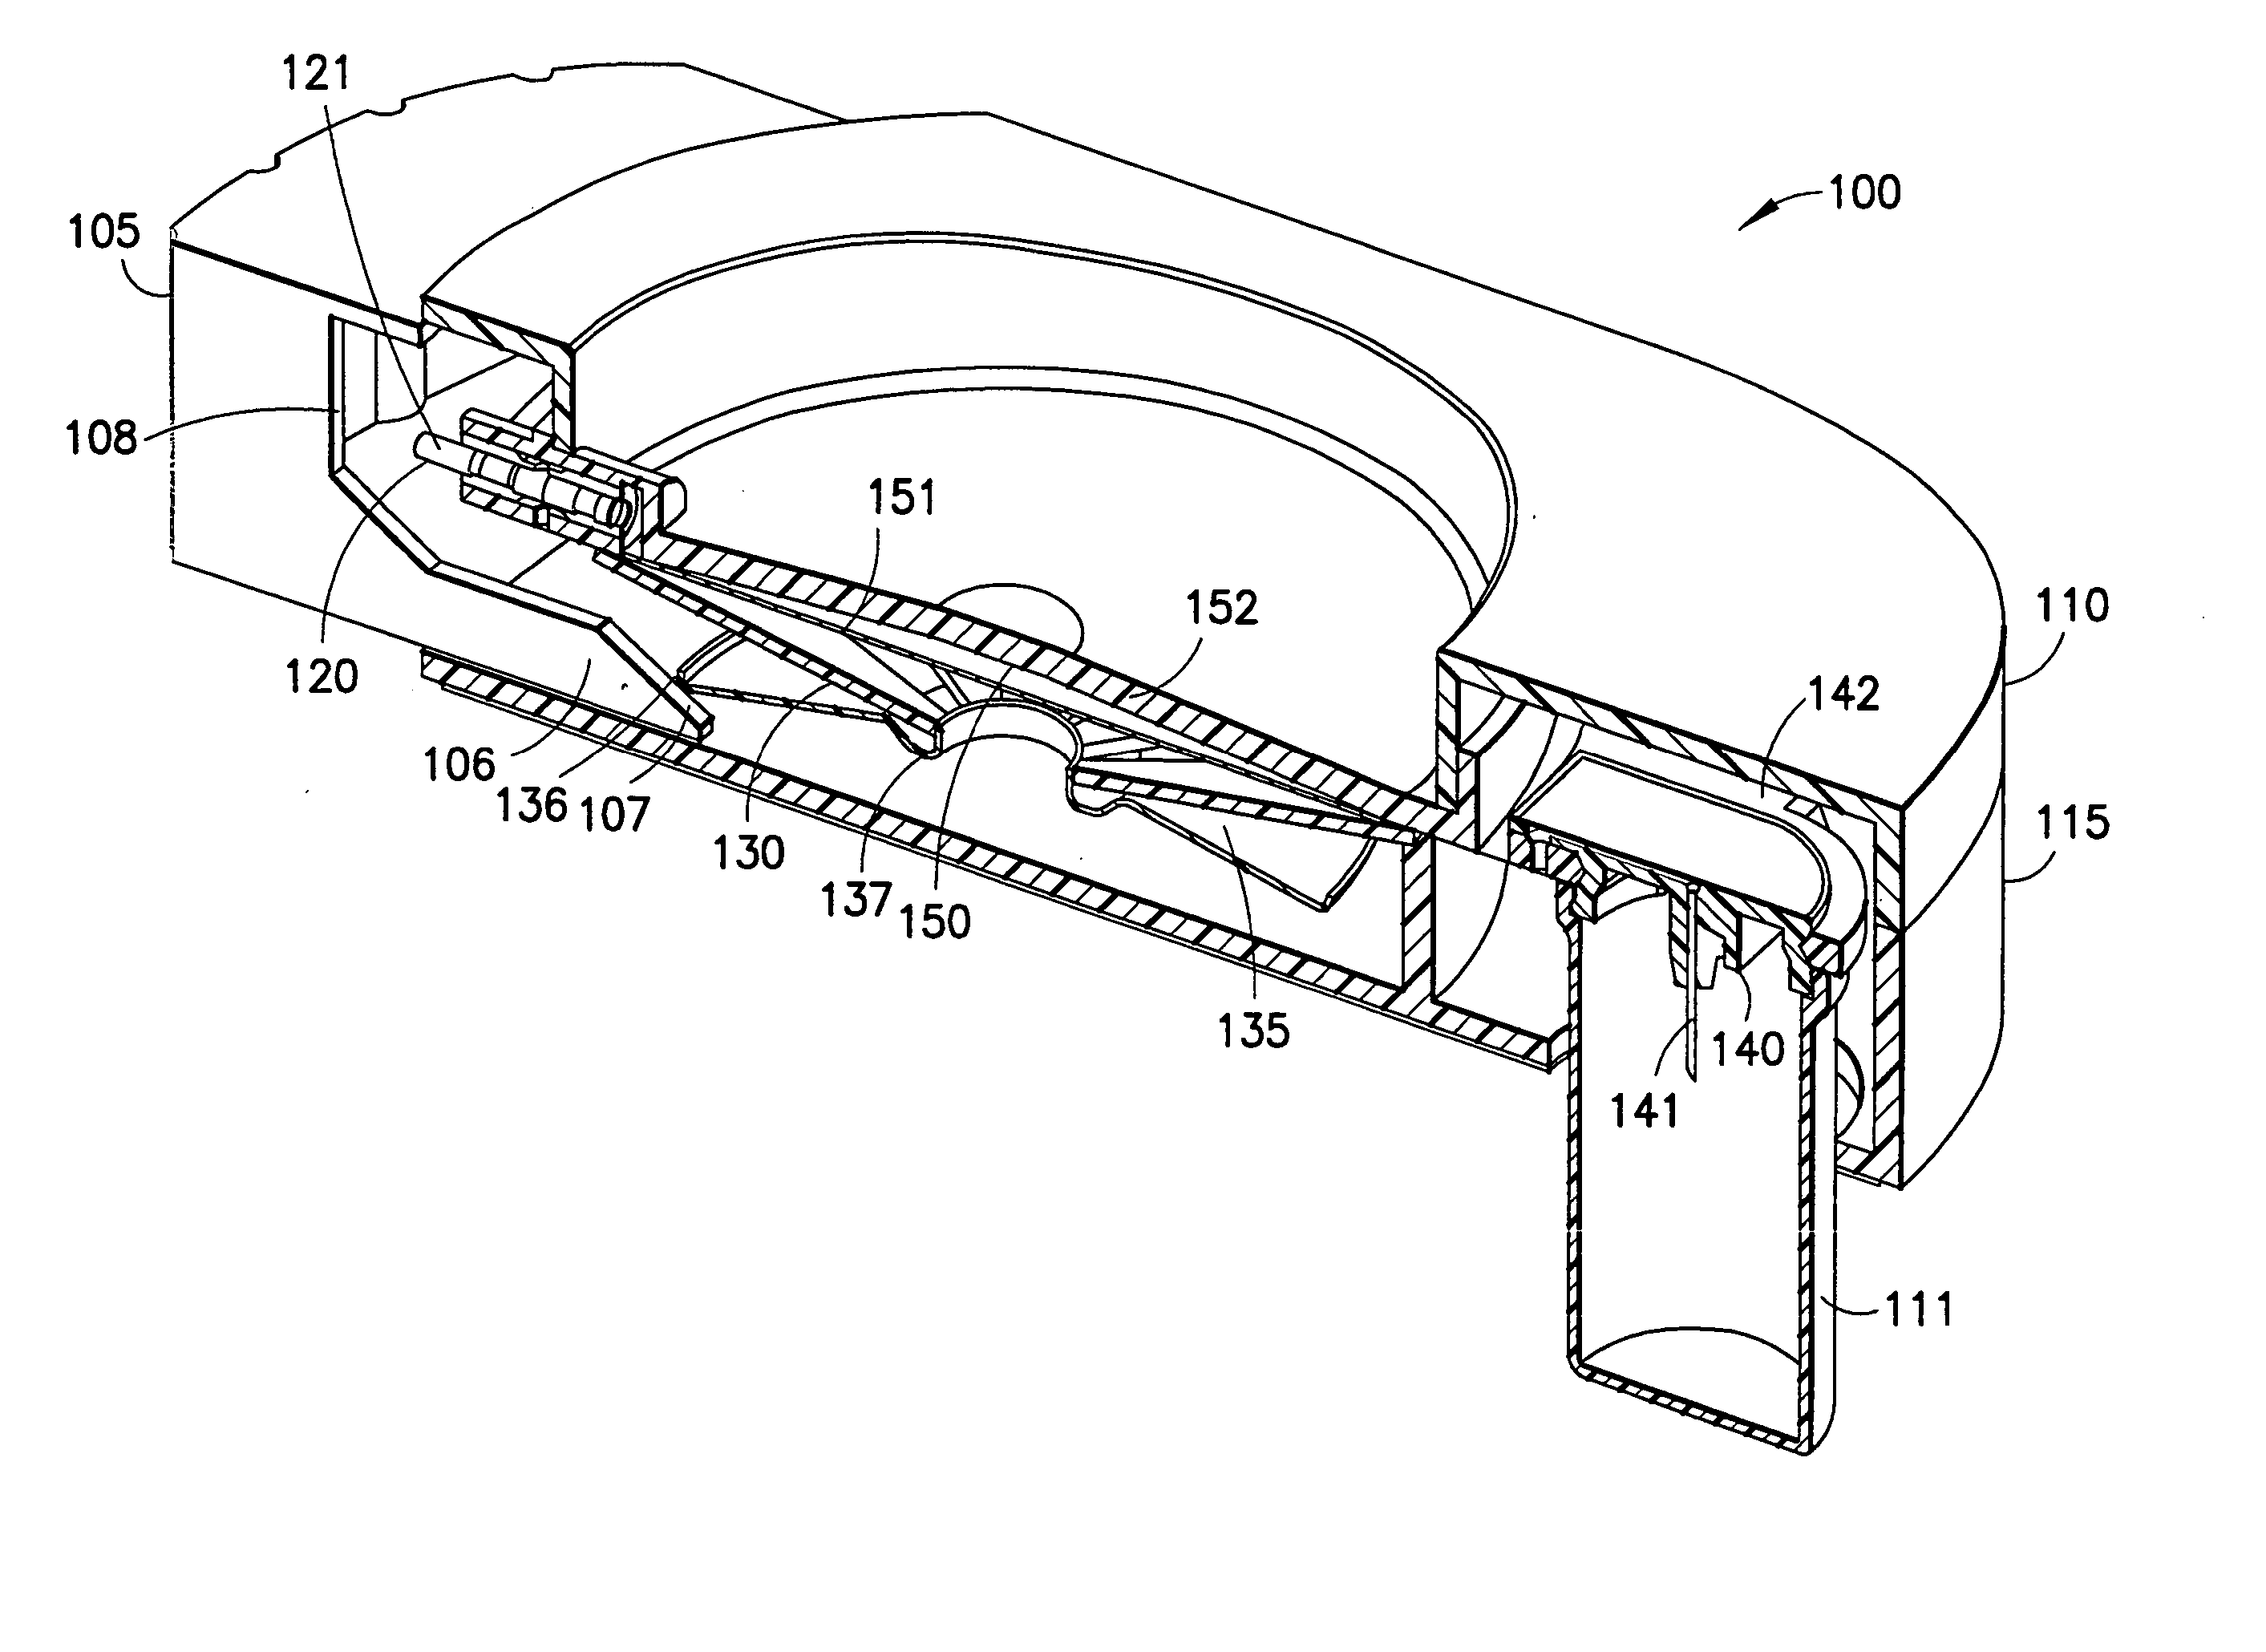 Patch-like infusion device